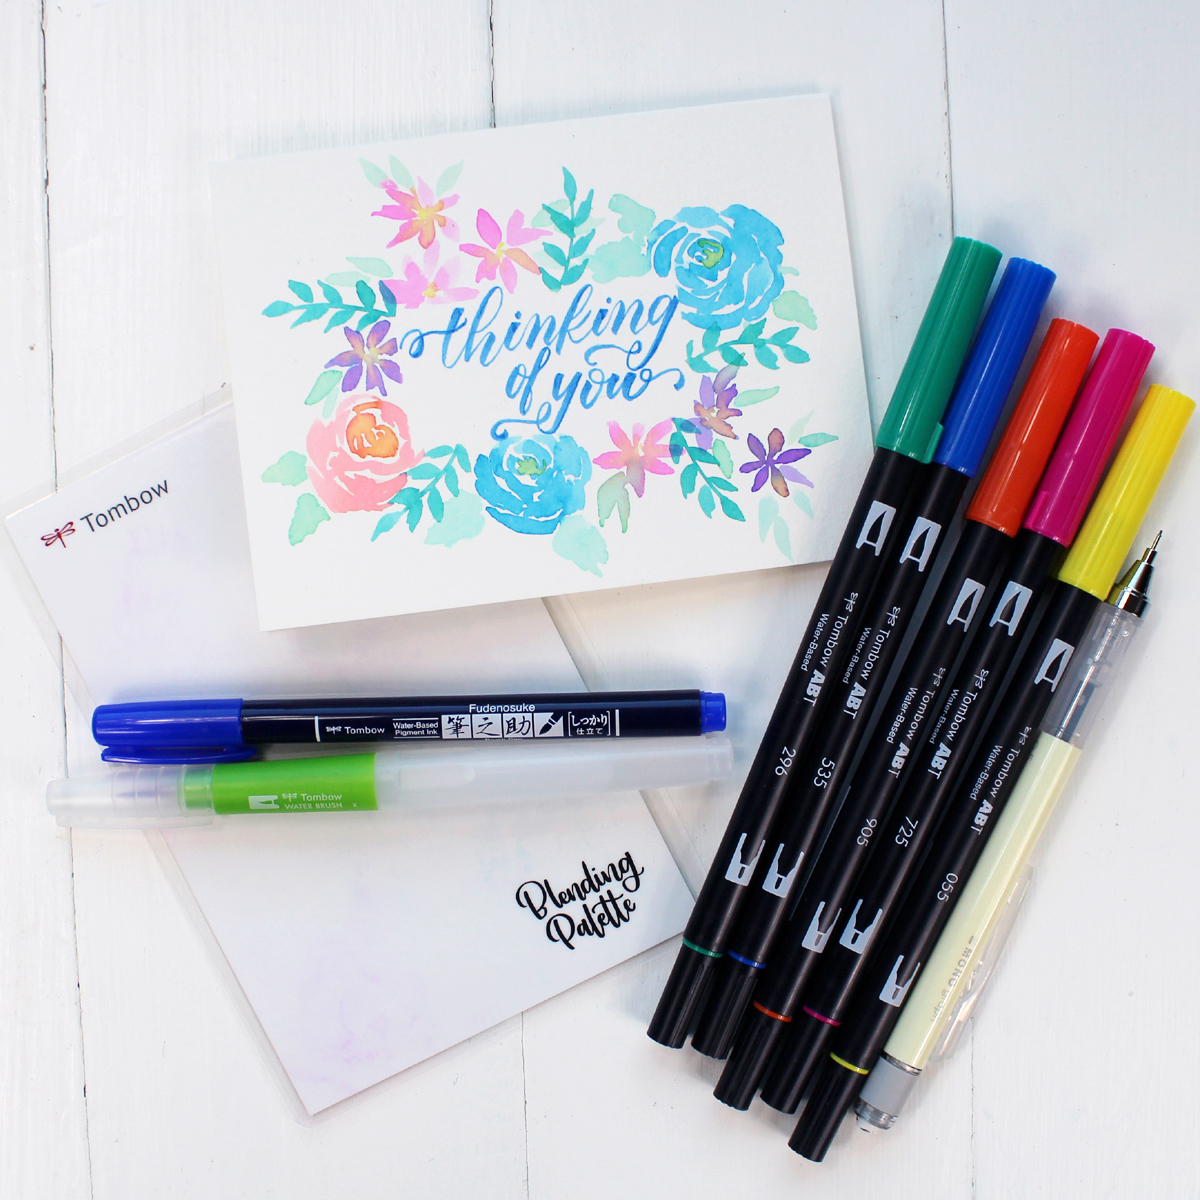 Use Tombow Dual Brush Pens to paint flowers and make a stunning floral greeting card.